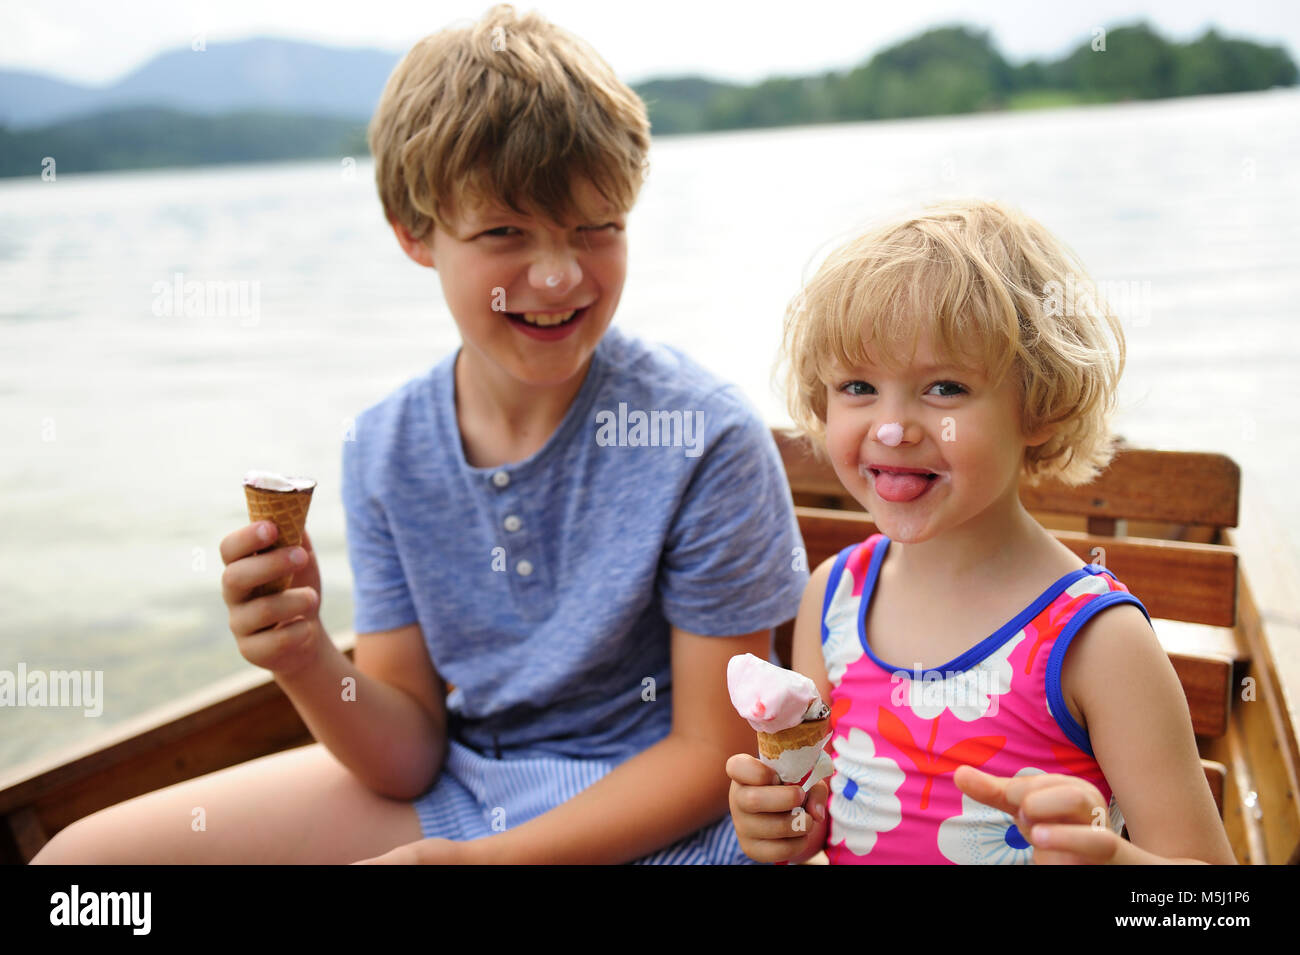 Portrait of little girl sitting in rowing boat with her brother eating icecream Stock Photo